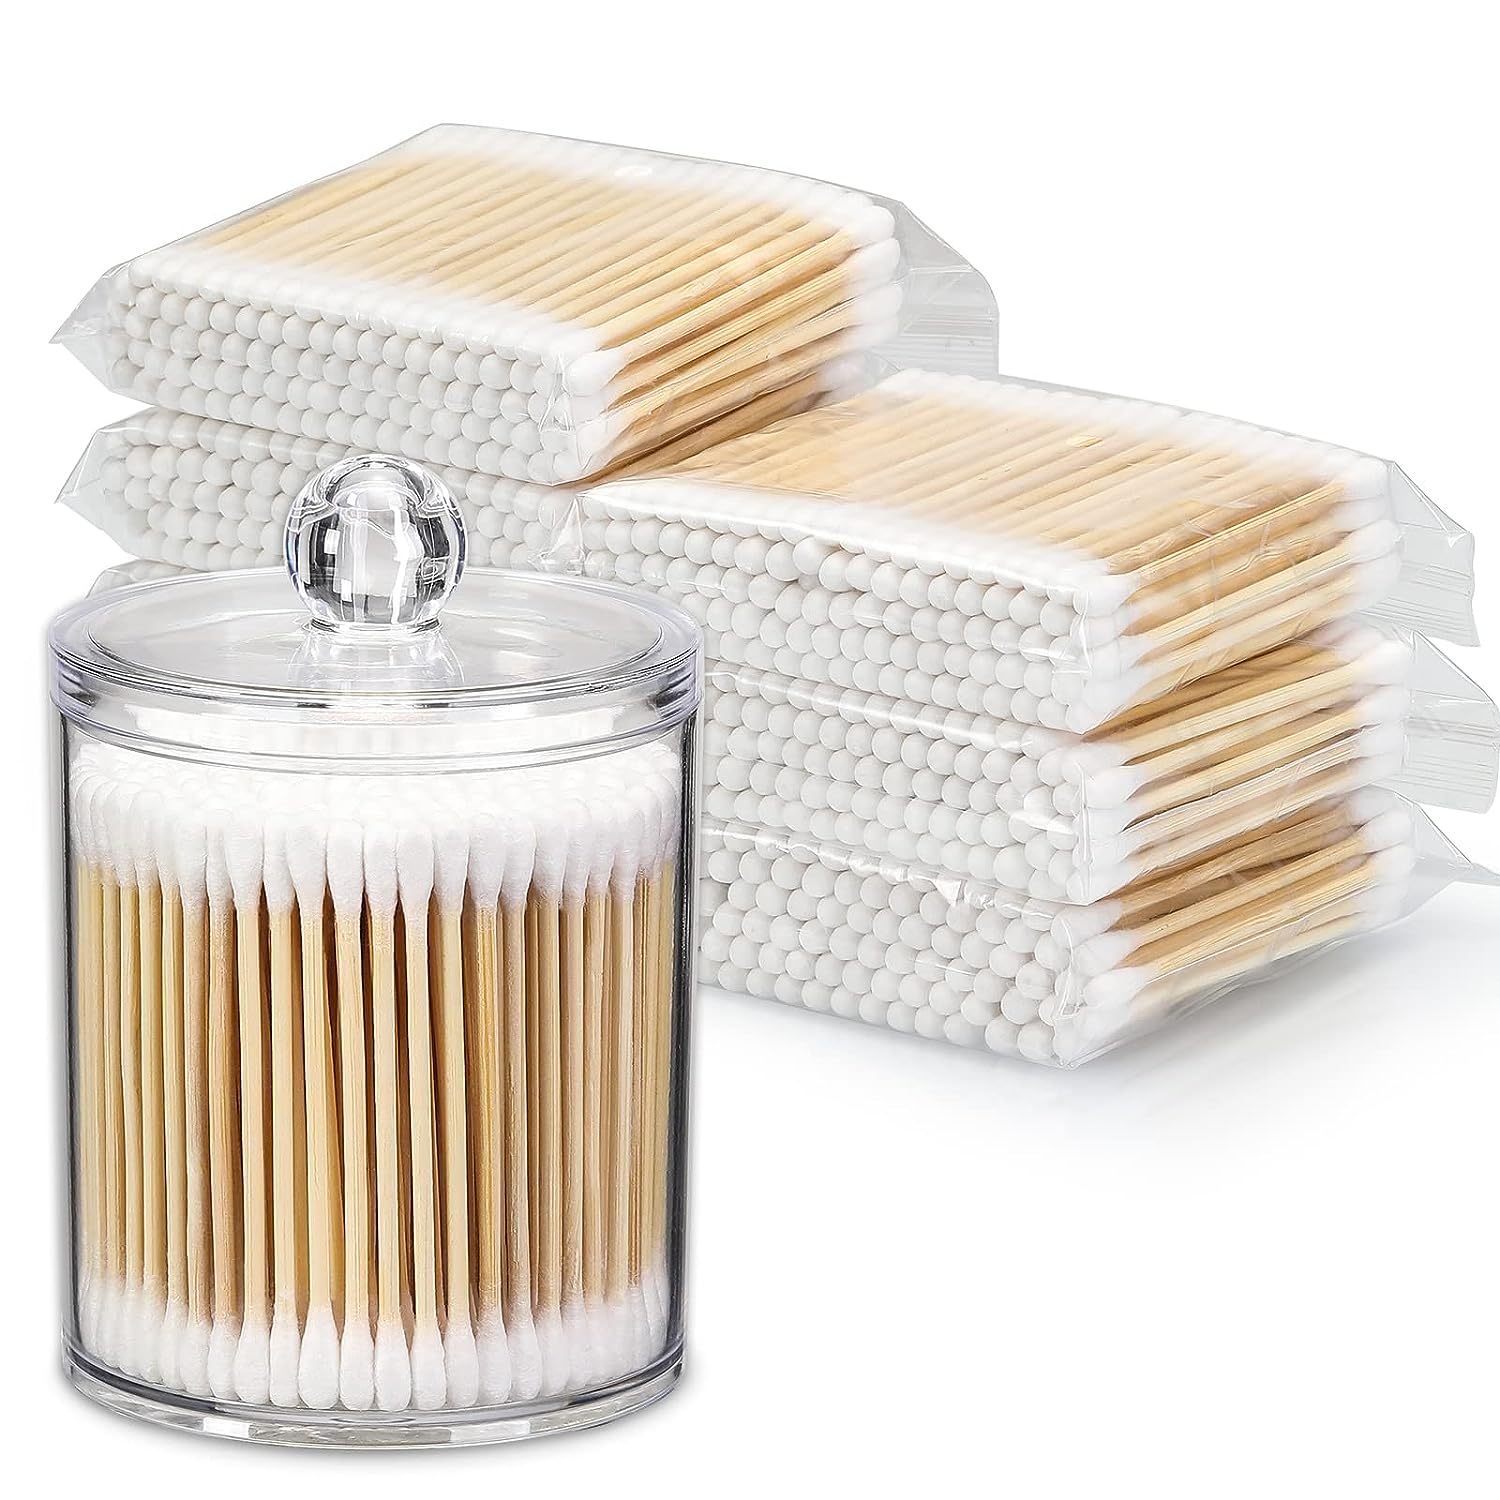 700ct Bamboo shaft, cotton swabs. 42% off. $6.98